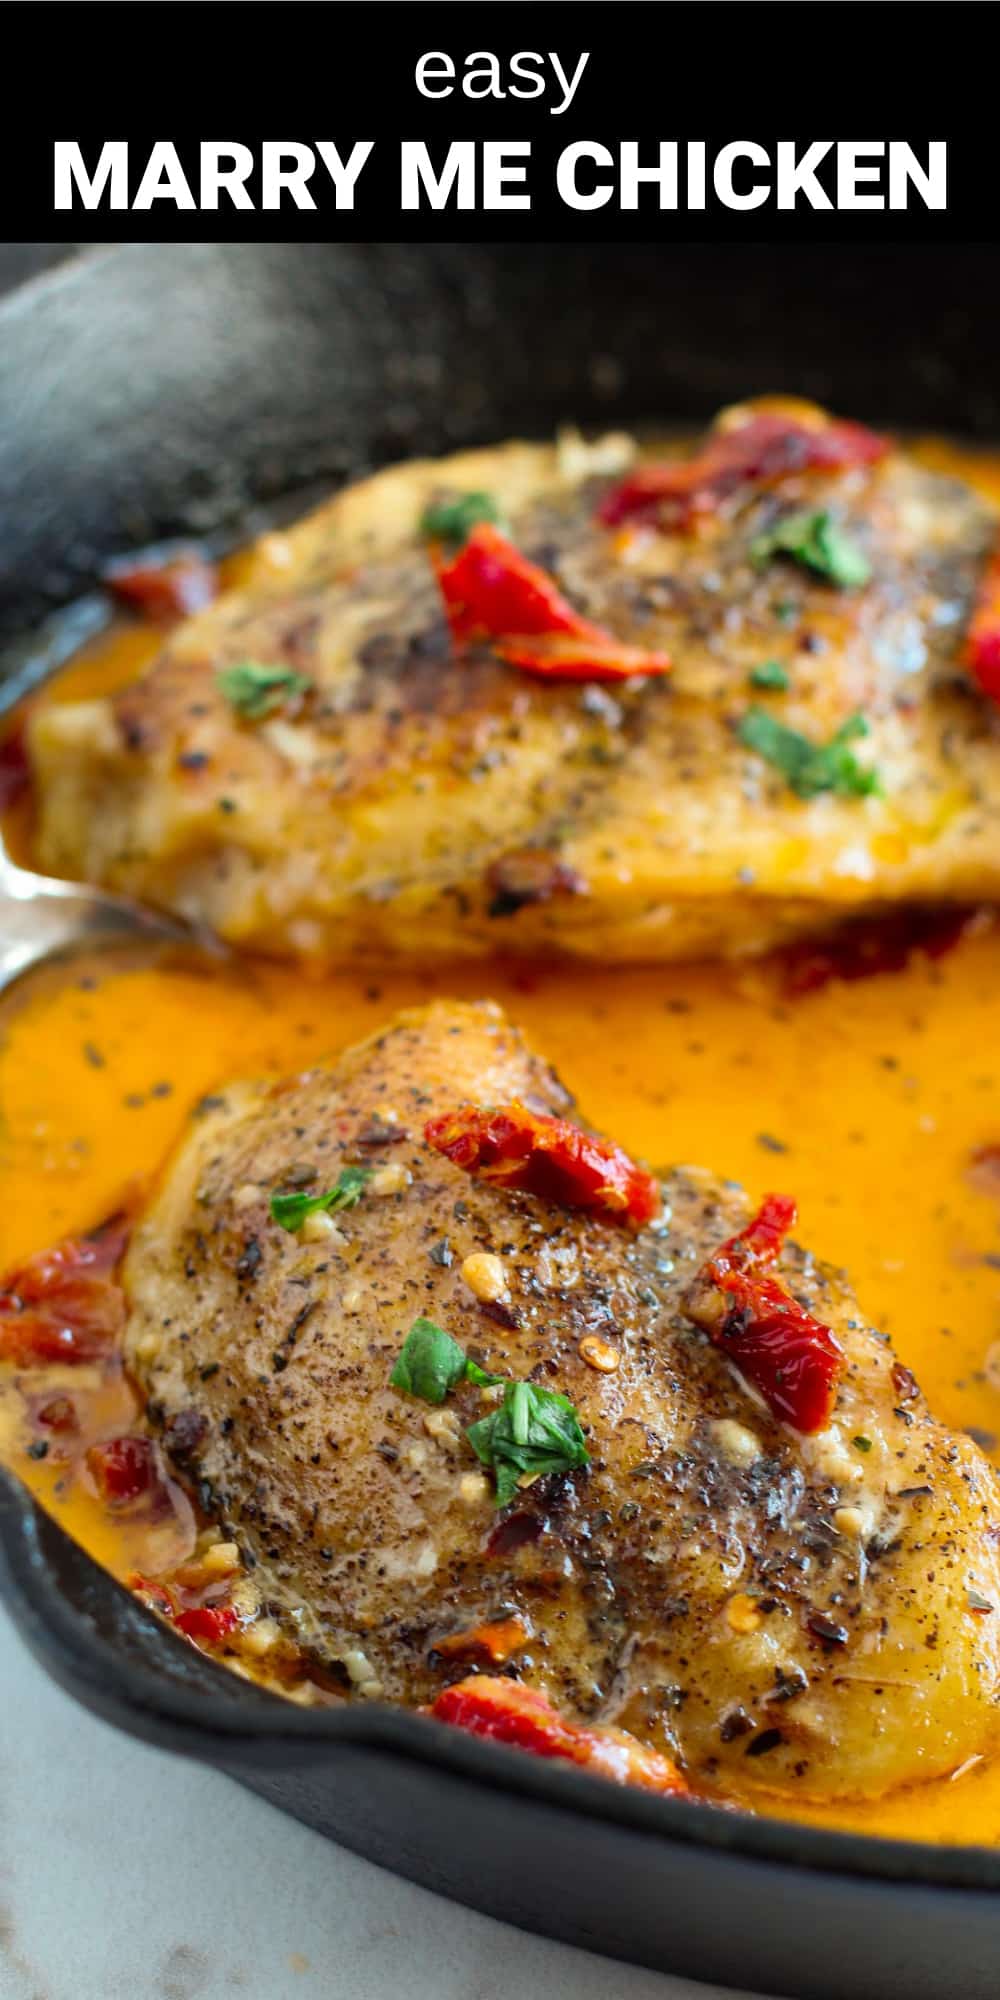 This Marry Me Chicken has tender, juicy chicken breasts that are smothered in a tangy sundried tomato and savory herb cream sauce that will leave everyone begging for seconds. It’s a must-try, one-skillet recipe that’s easy to make and can be on the table in just 45 minutes. 